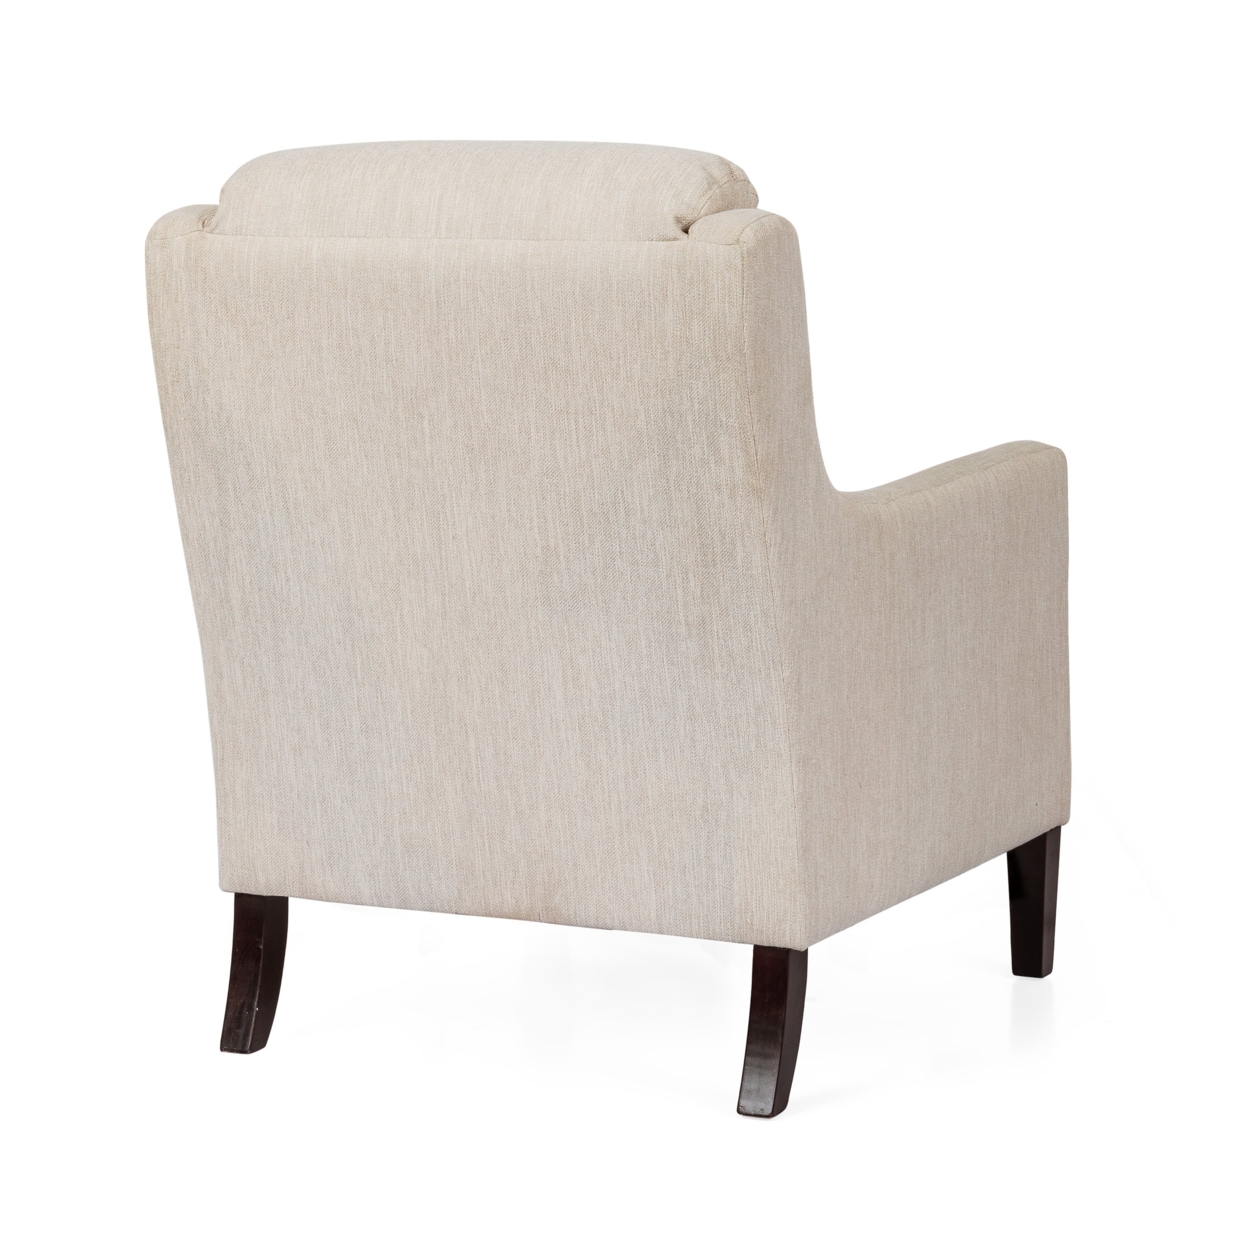 Baden Contemporary Pillow Tufted Fabric Club Chair - Beige